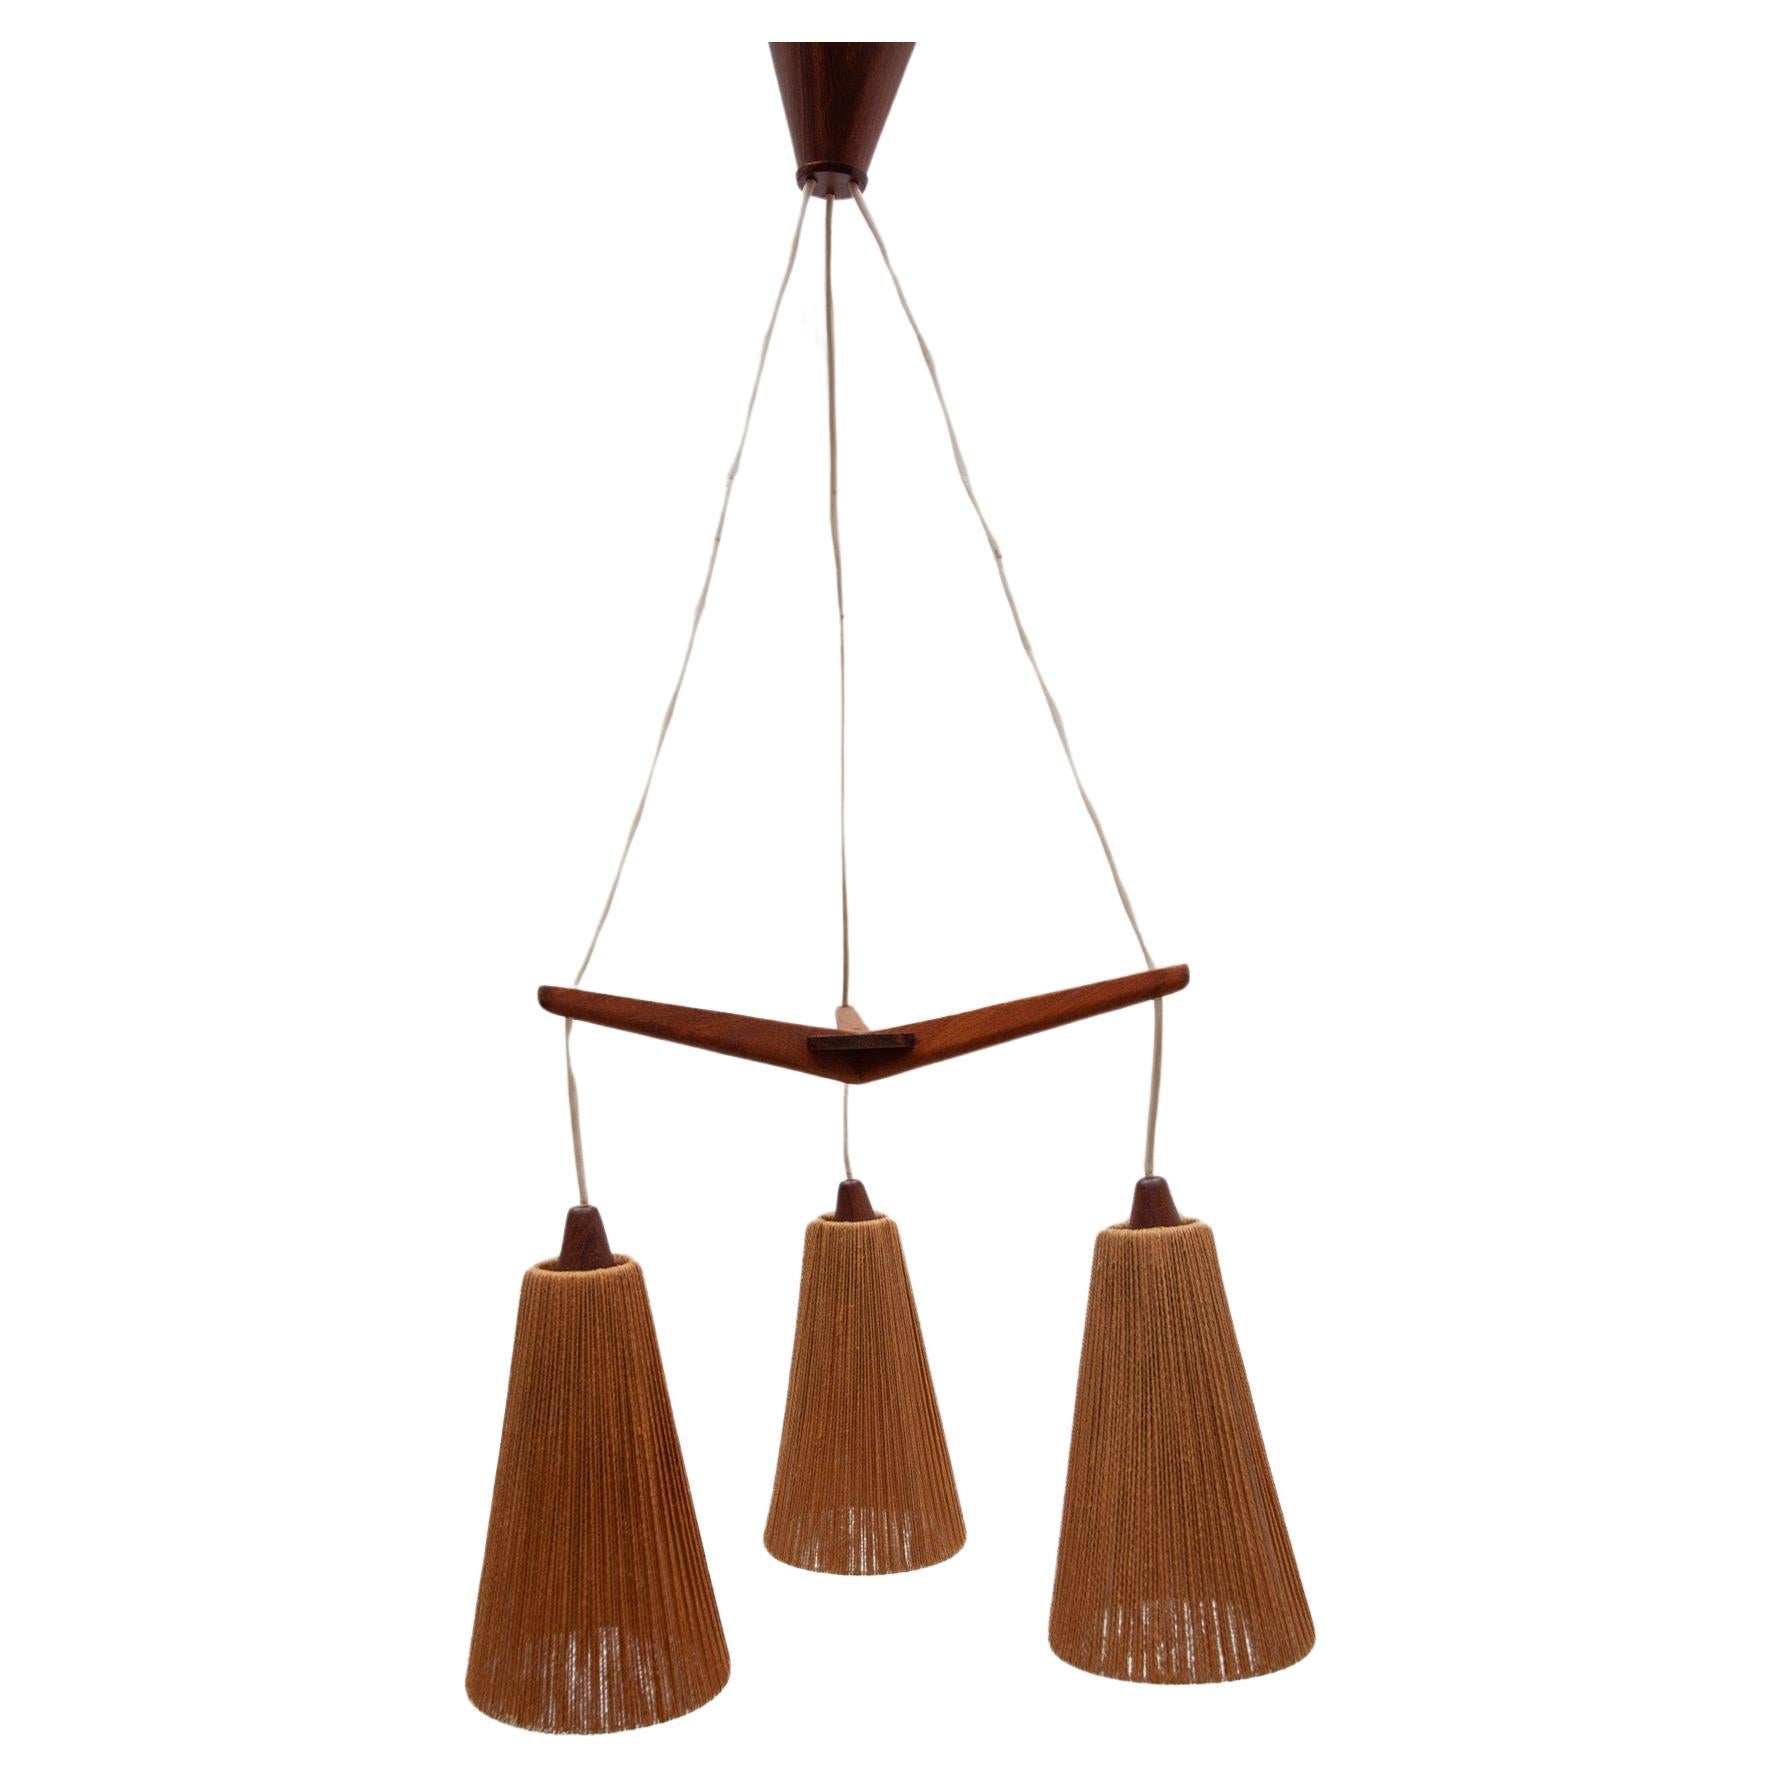 Teak and Jute Cord Pendant Cascade Lamp by Temde, Germany, 1960s